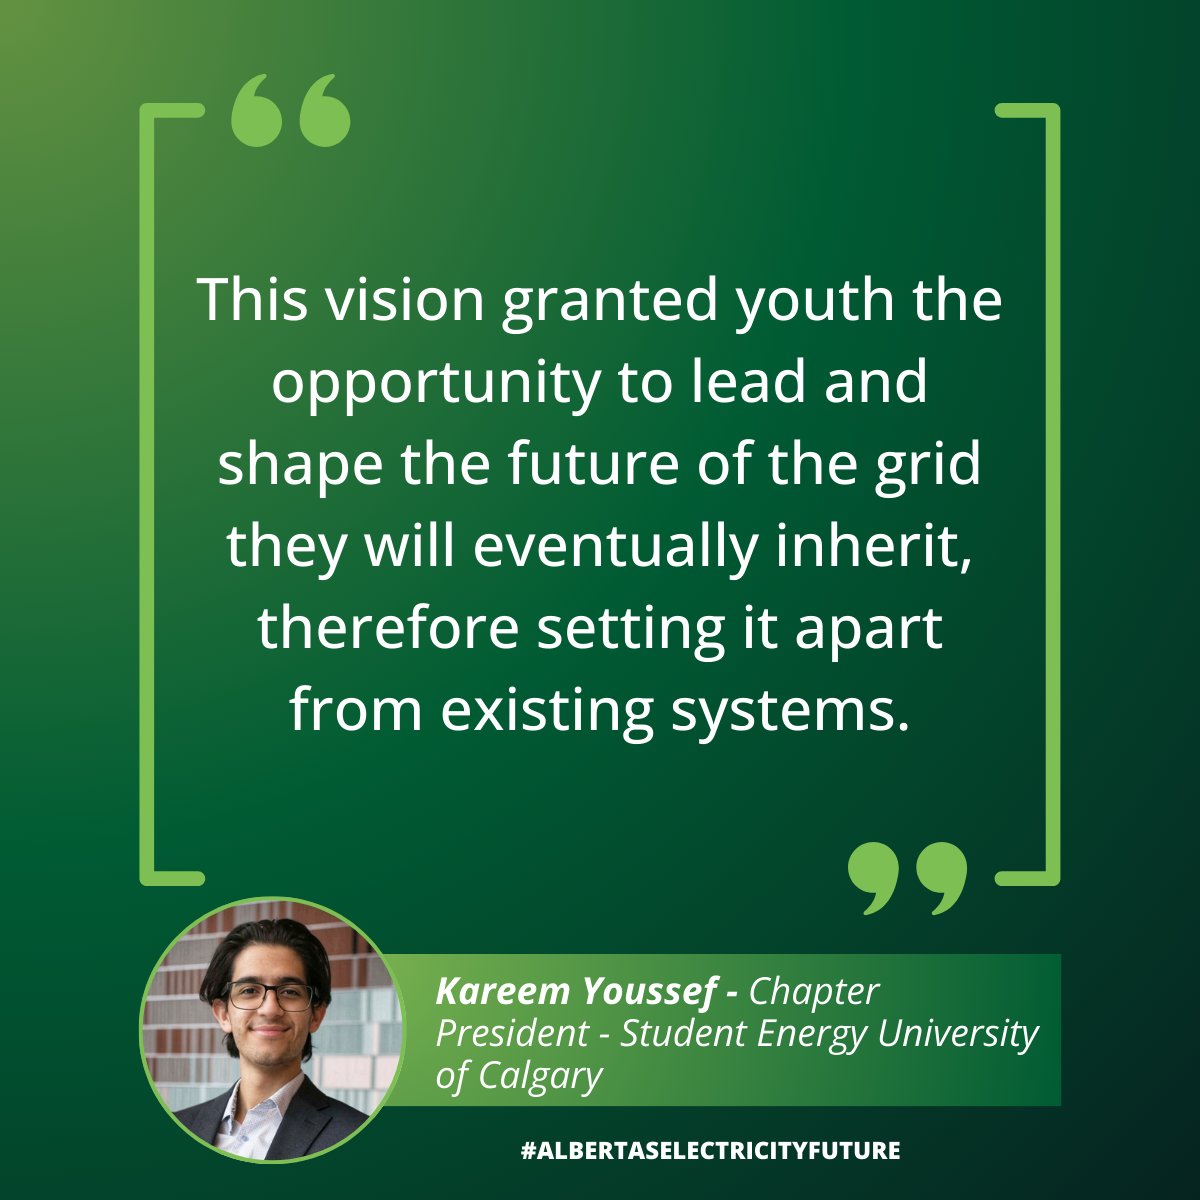 #LeadingTheCharge was created by the largest & most diverse coalition Alberta's electricity sector has ever seen. Participants included next-generation leaders like @se_uofc's Kareem Youssef, who represented youth whose futures depend on the system: ⚡energyfutureslab.com/leadingthechar…